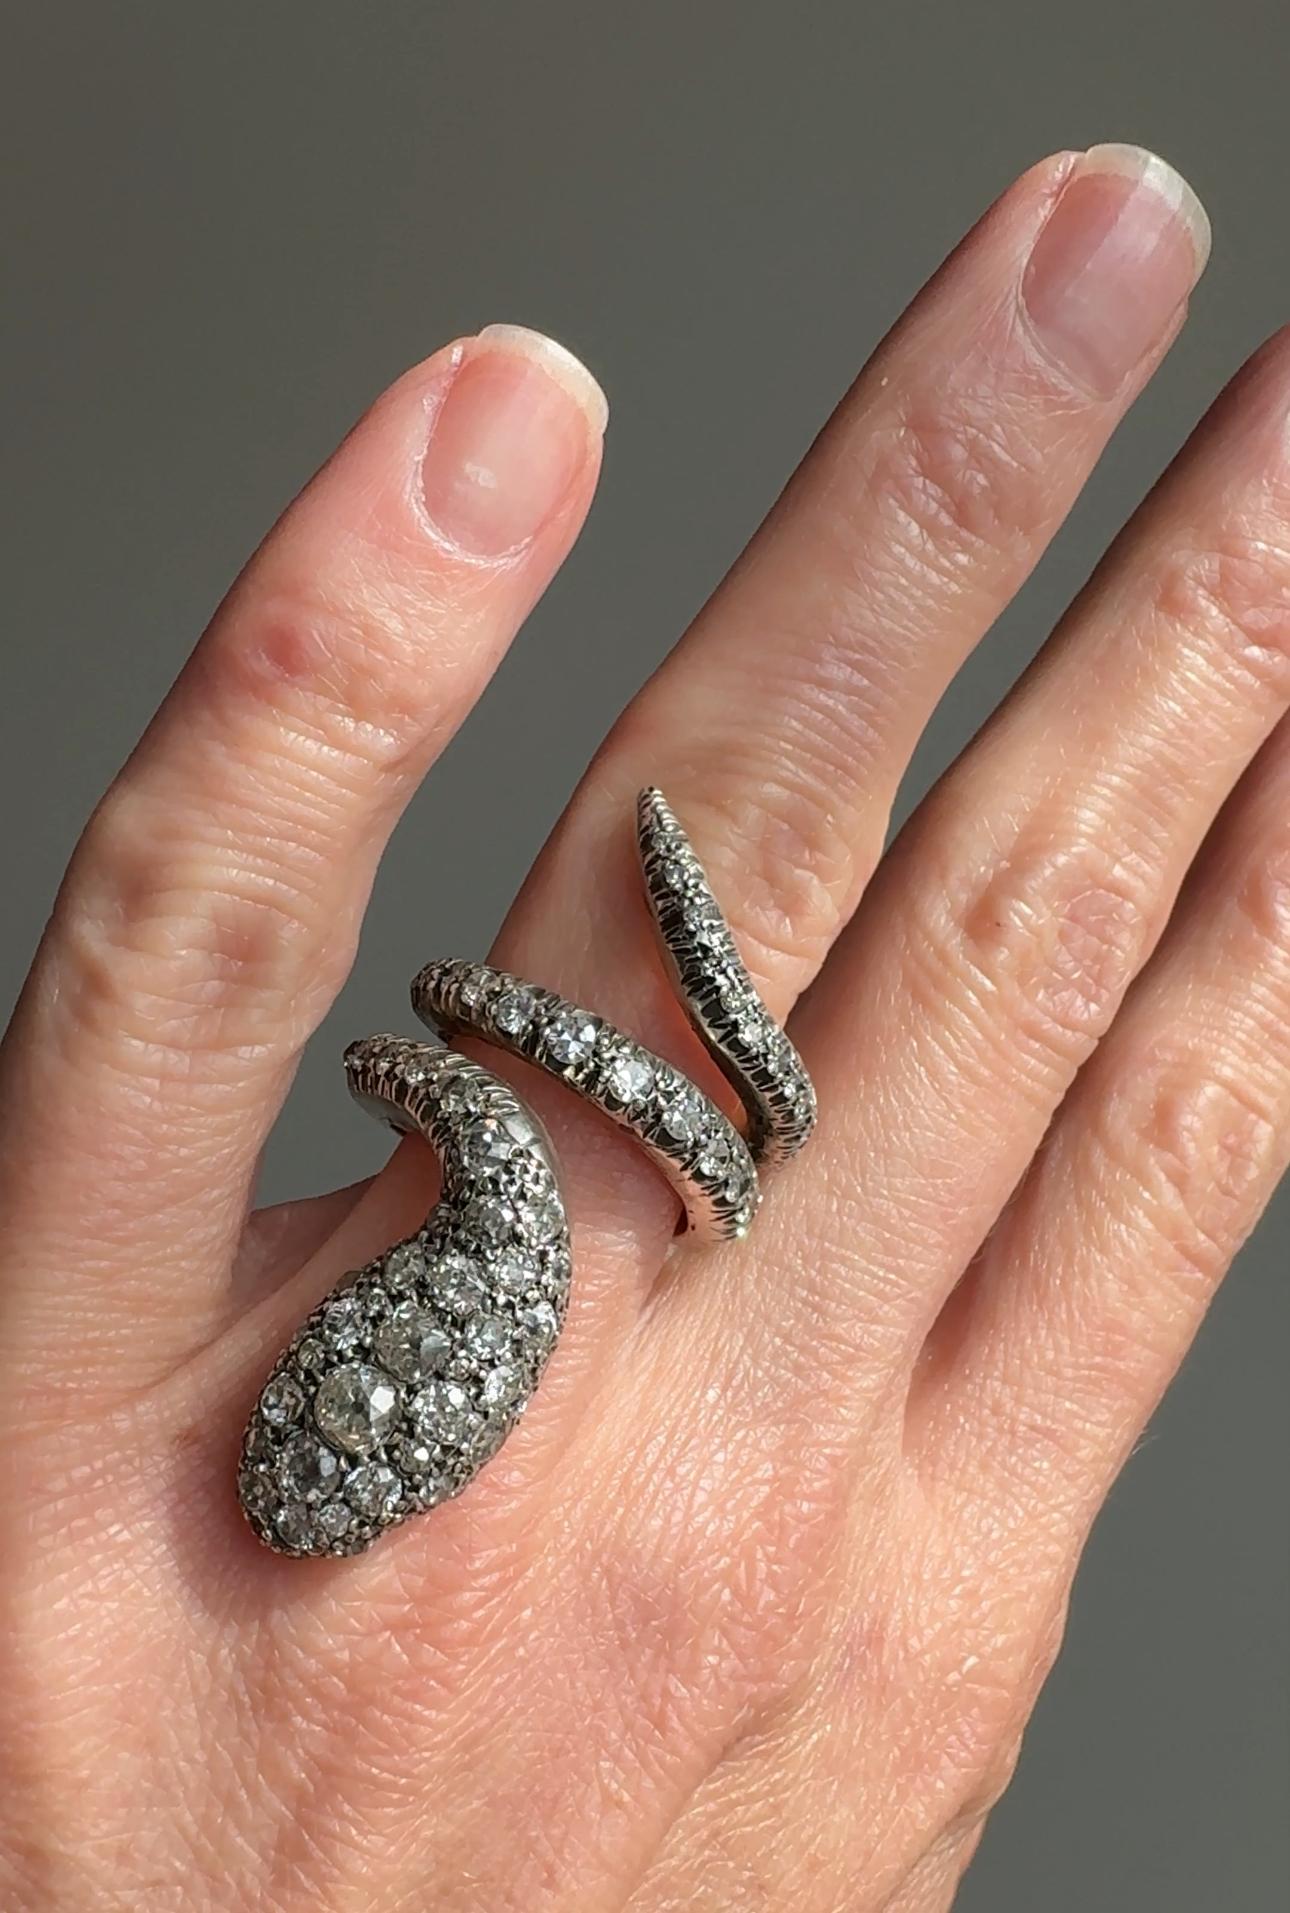 The serpent was a beautiful Victorian era symbol of everlasting love and devotion. This ravishing late Victorian era token of love is truly something special. Circa 1890, this sly diamond encrusted serpent glitters with 4 carats of old mine-cut